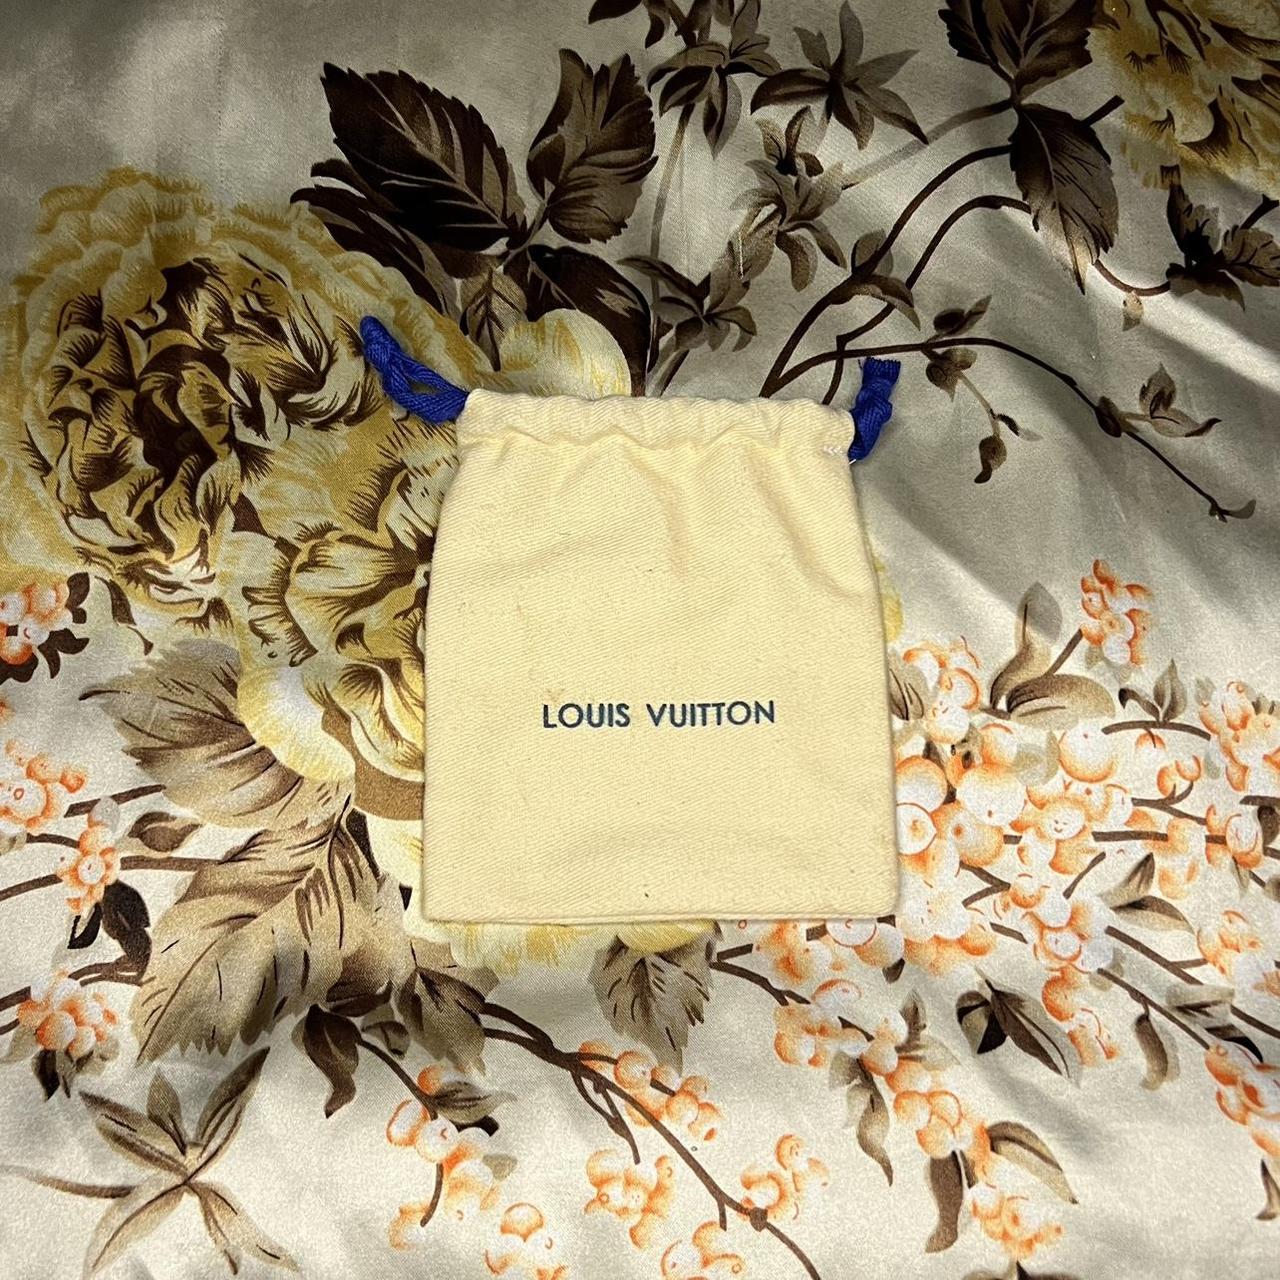 Louis Vuitton clam shell bag Vintage Zip with suede - Depop